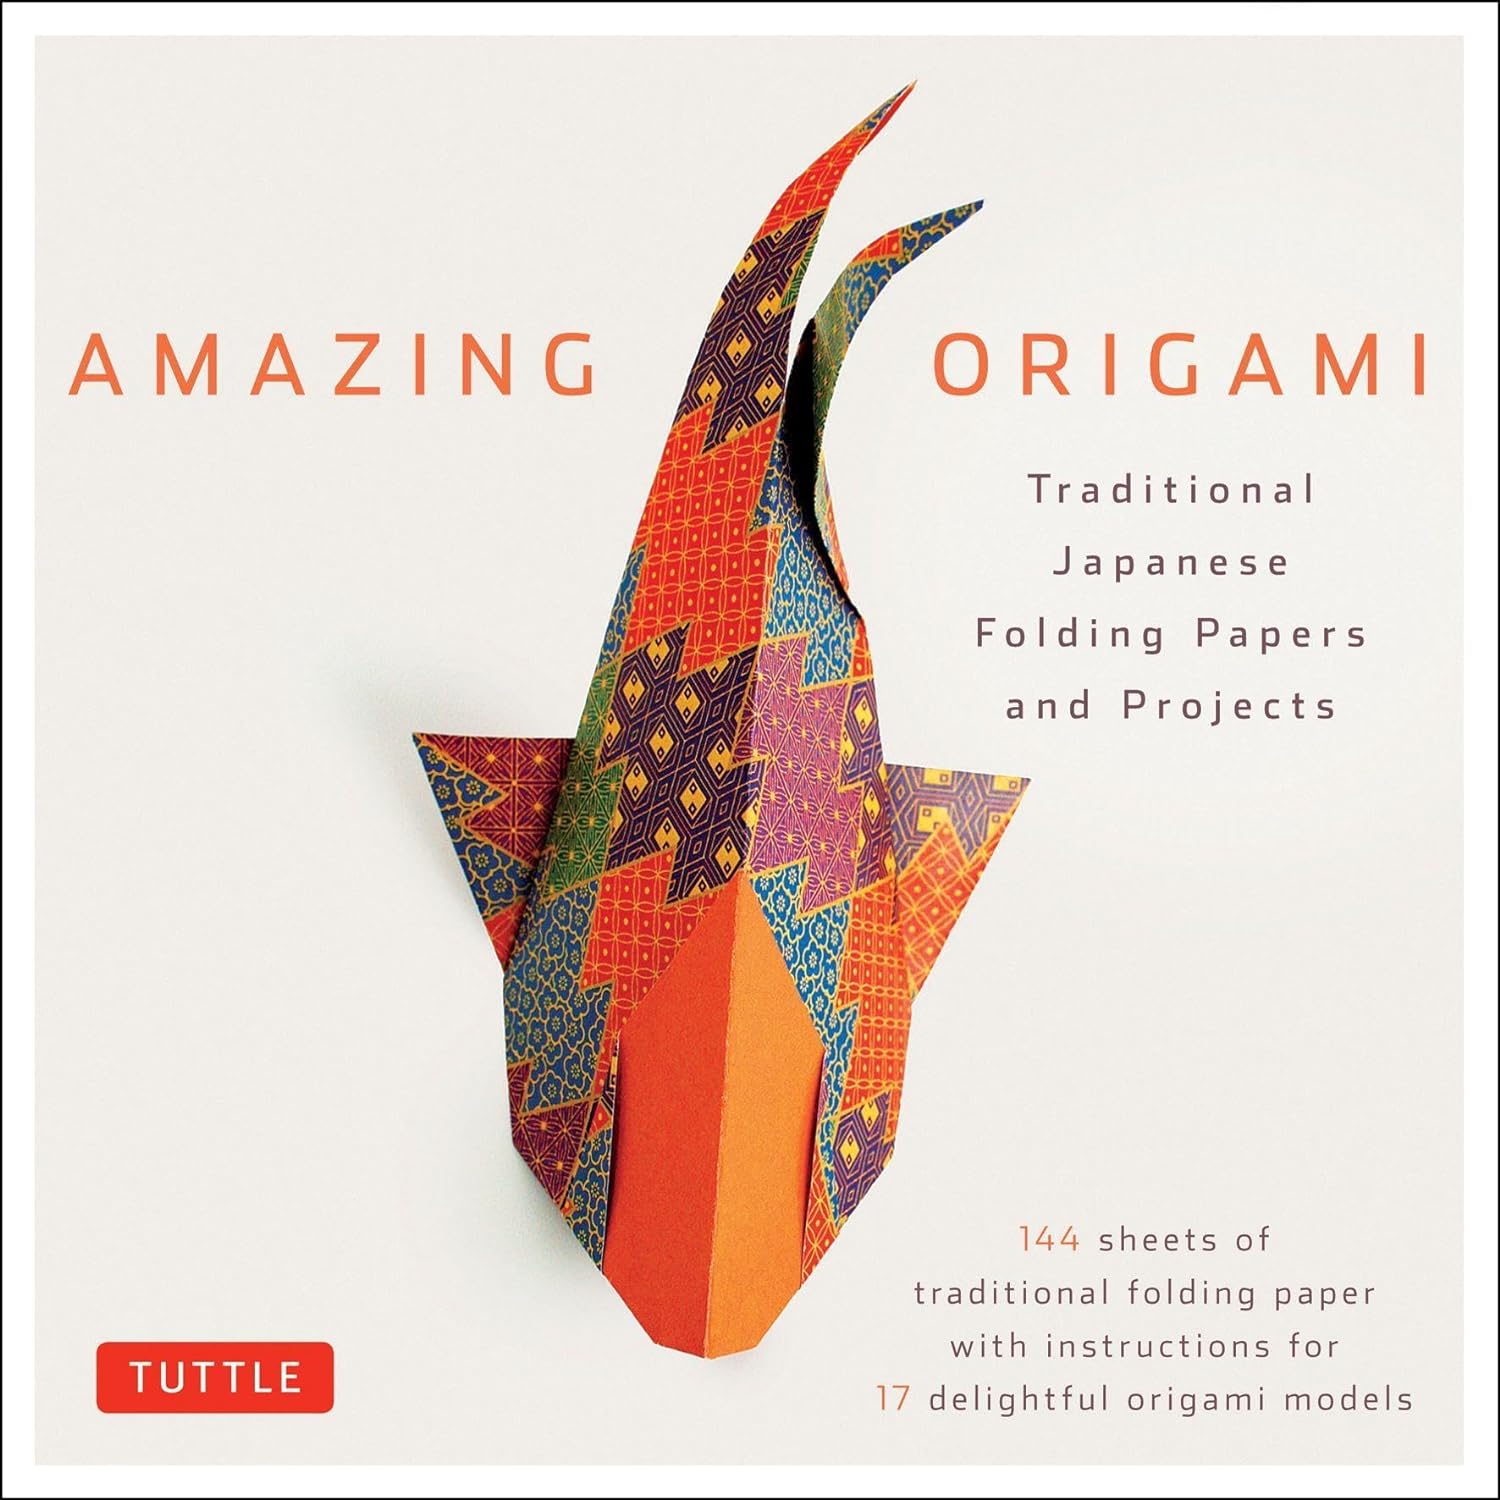 Amazing Origami Kit: Traditional Japanese Folding Papers and Projects [144 Origami Papers with Book, 17 Projects] Paperback – October 10, 2012